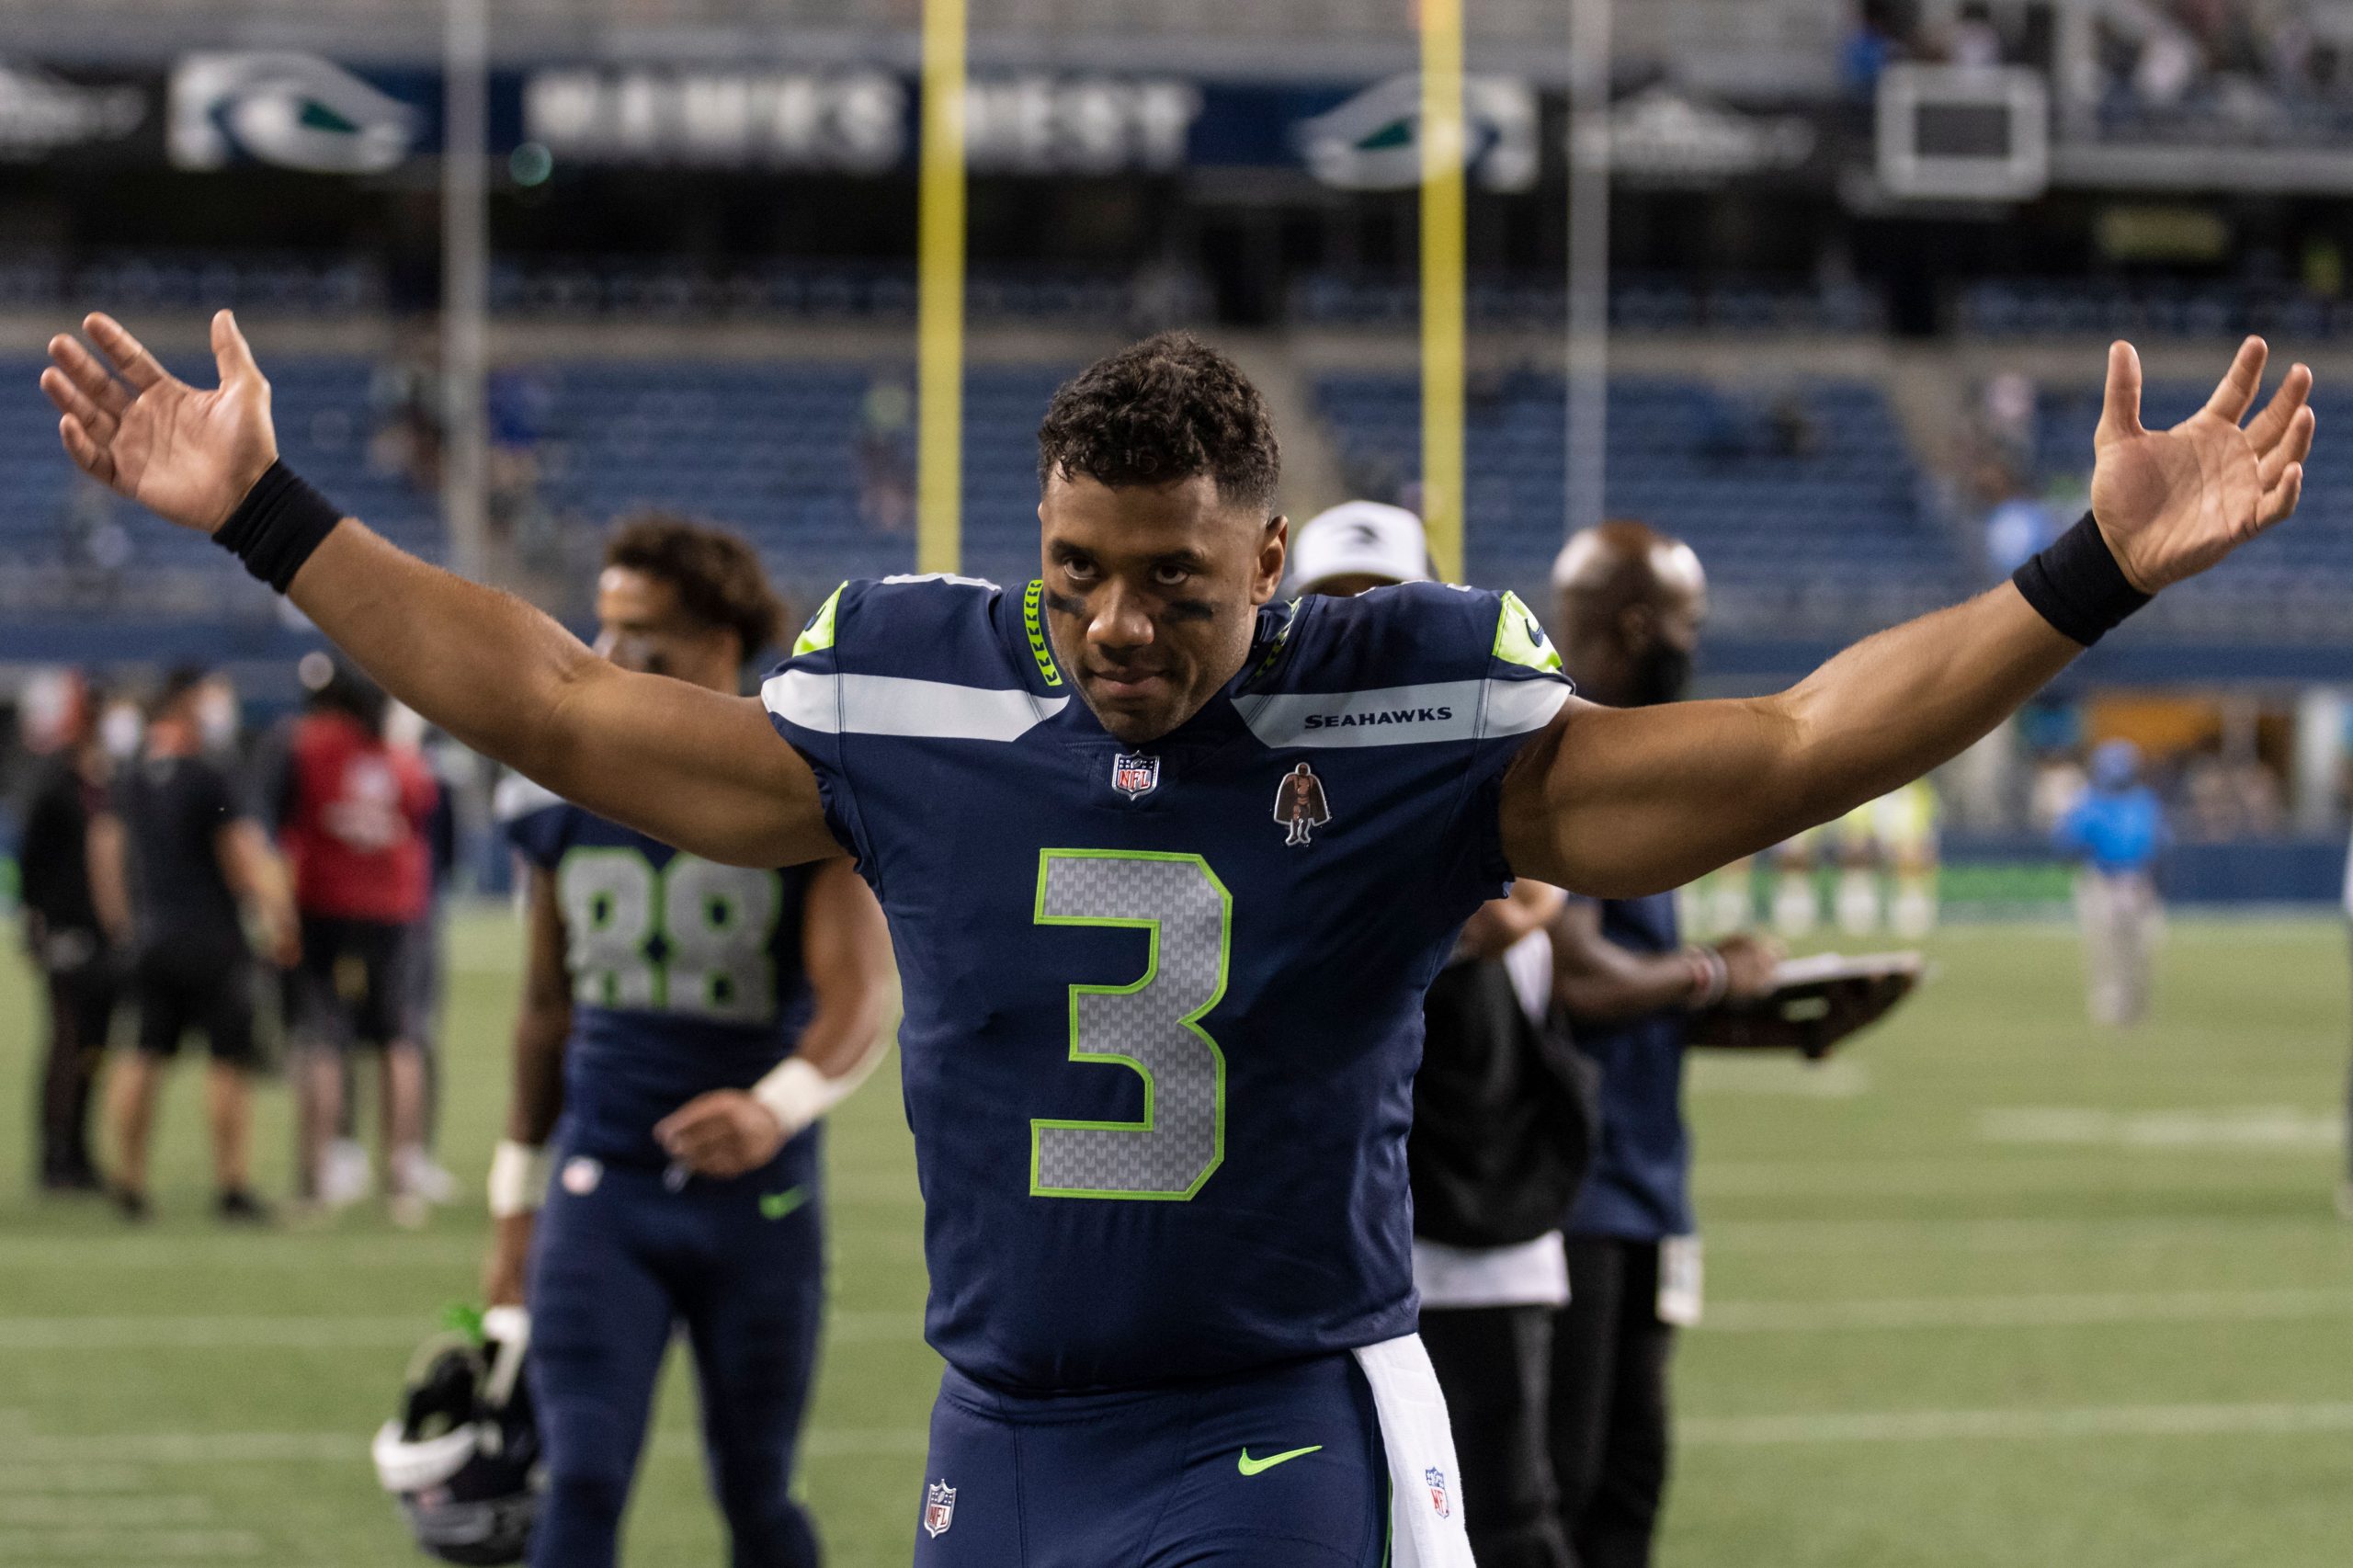 Seattle Seahawks agree to trade QB Russell Wilson to Denver Broncos: Report